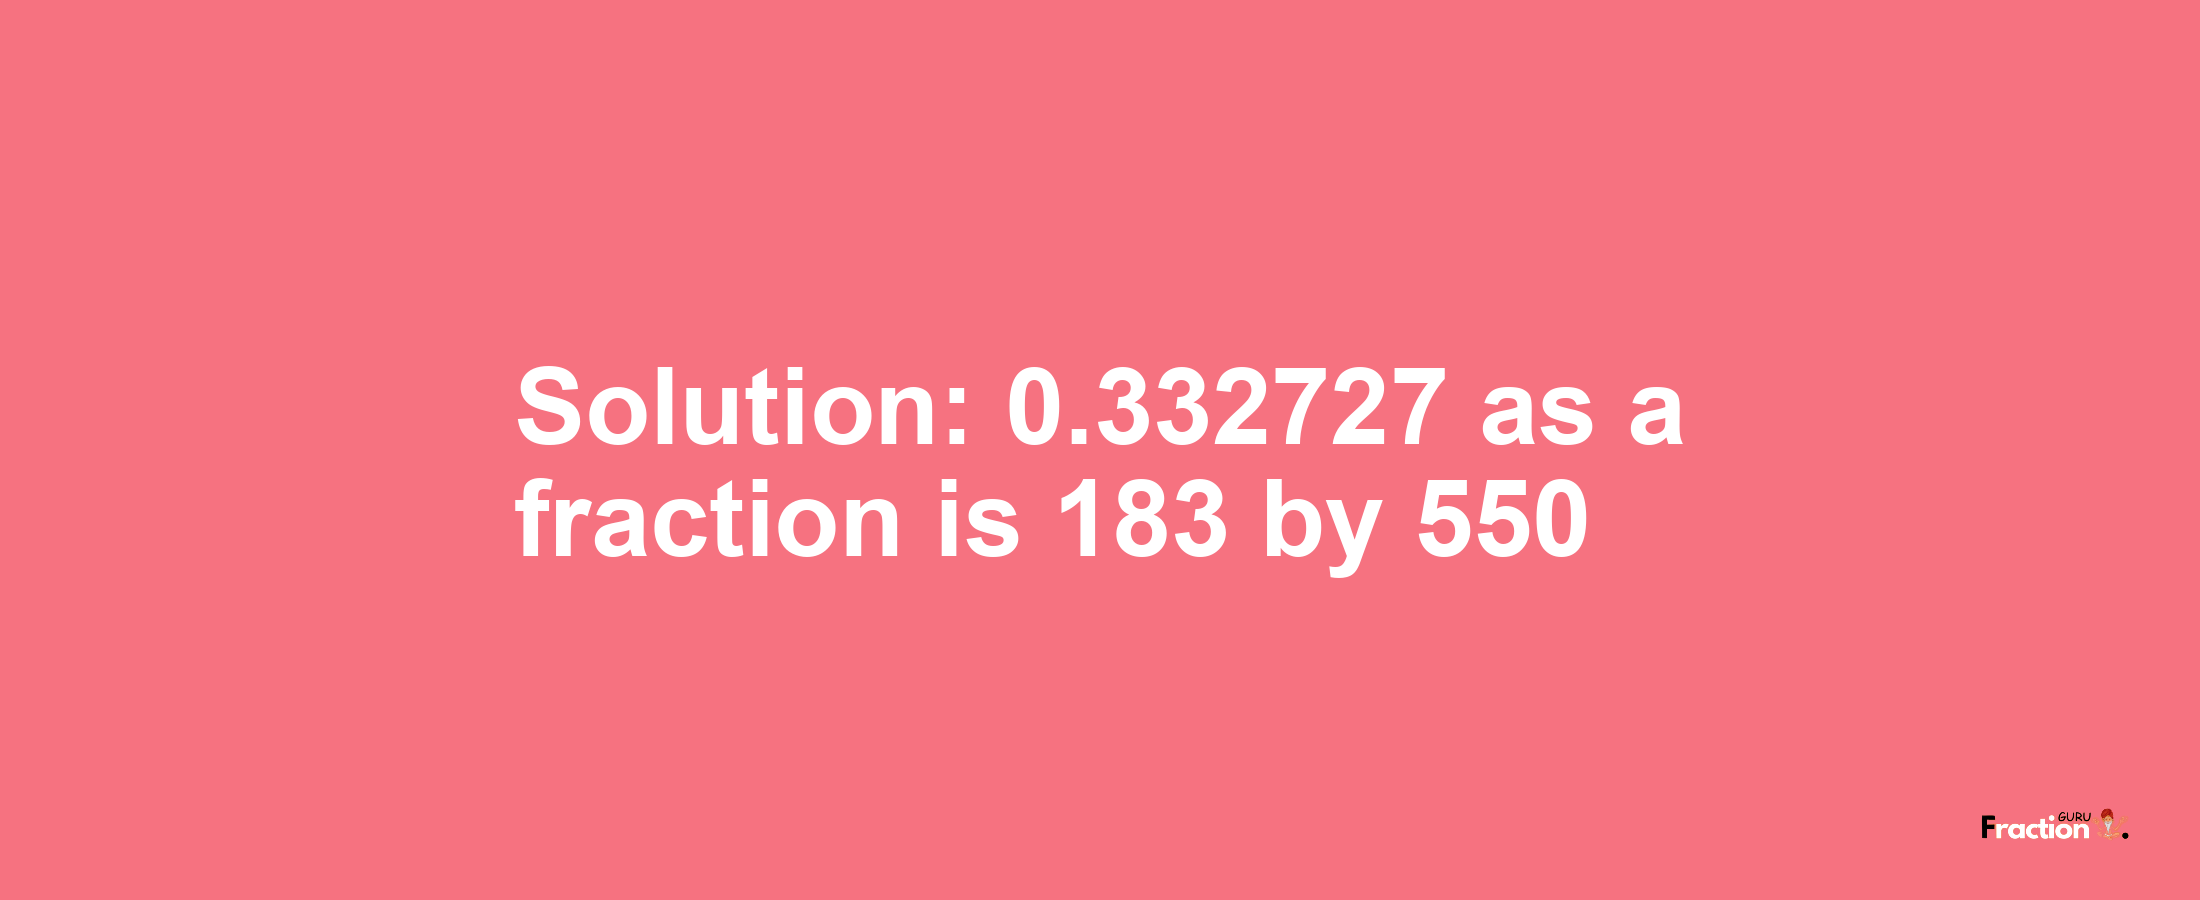 Solution:0.332727 as a fraction is 183/550